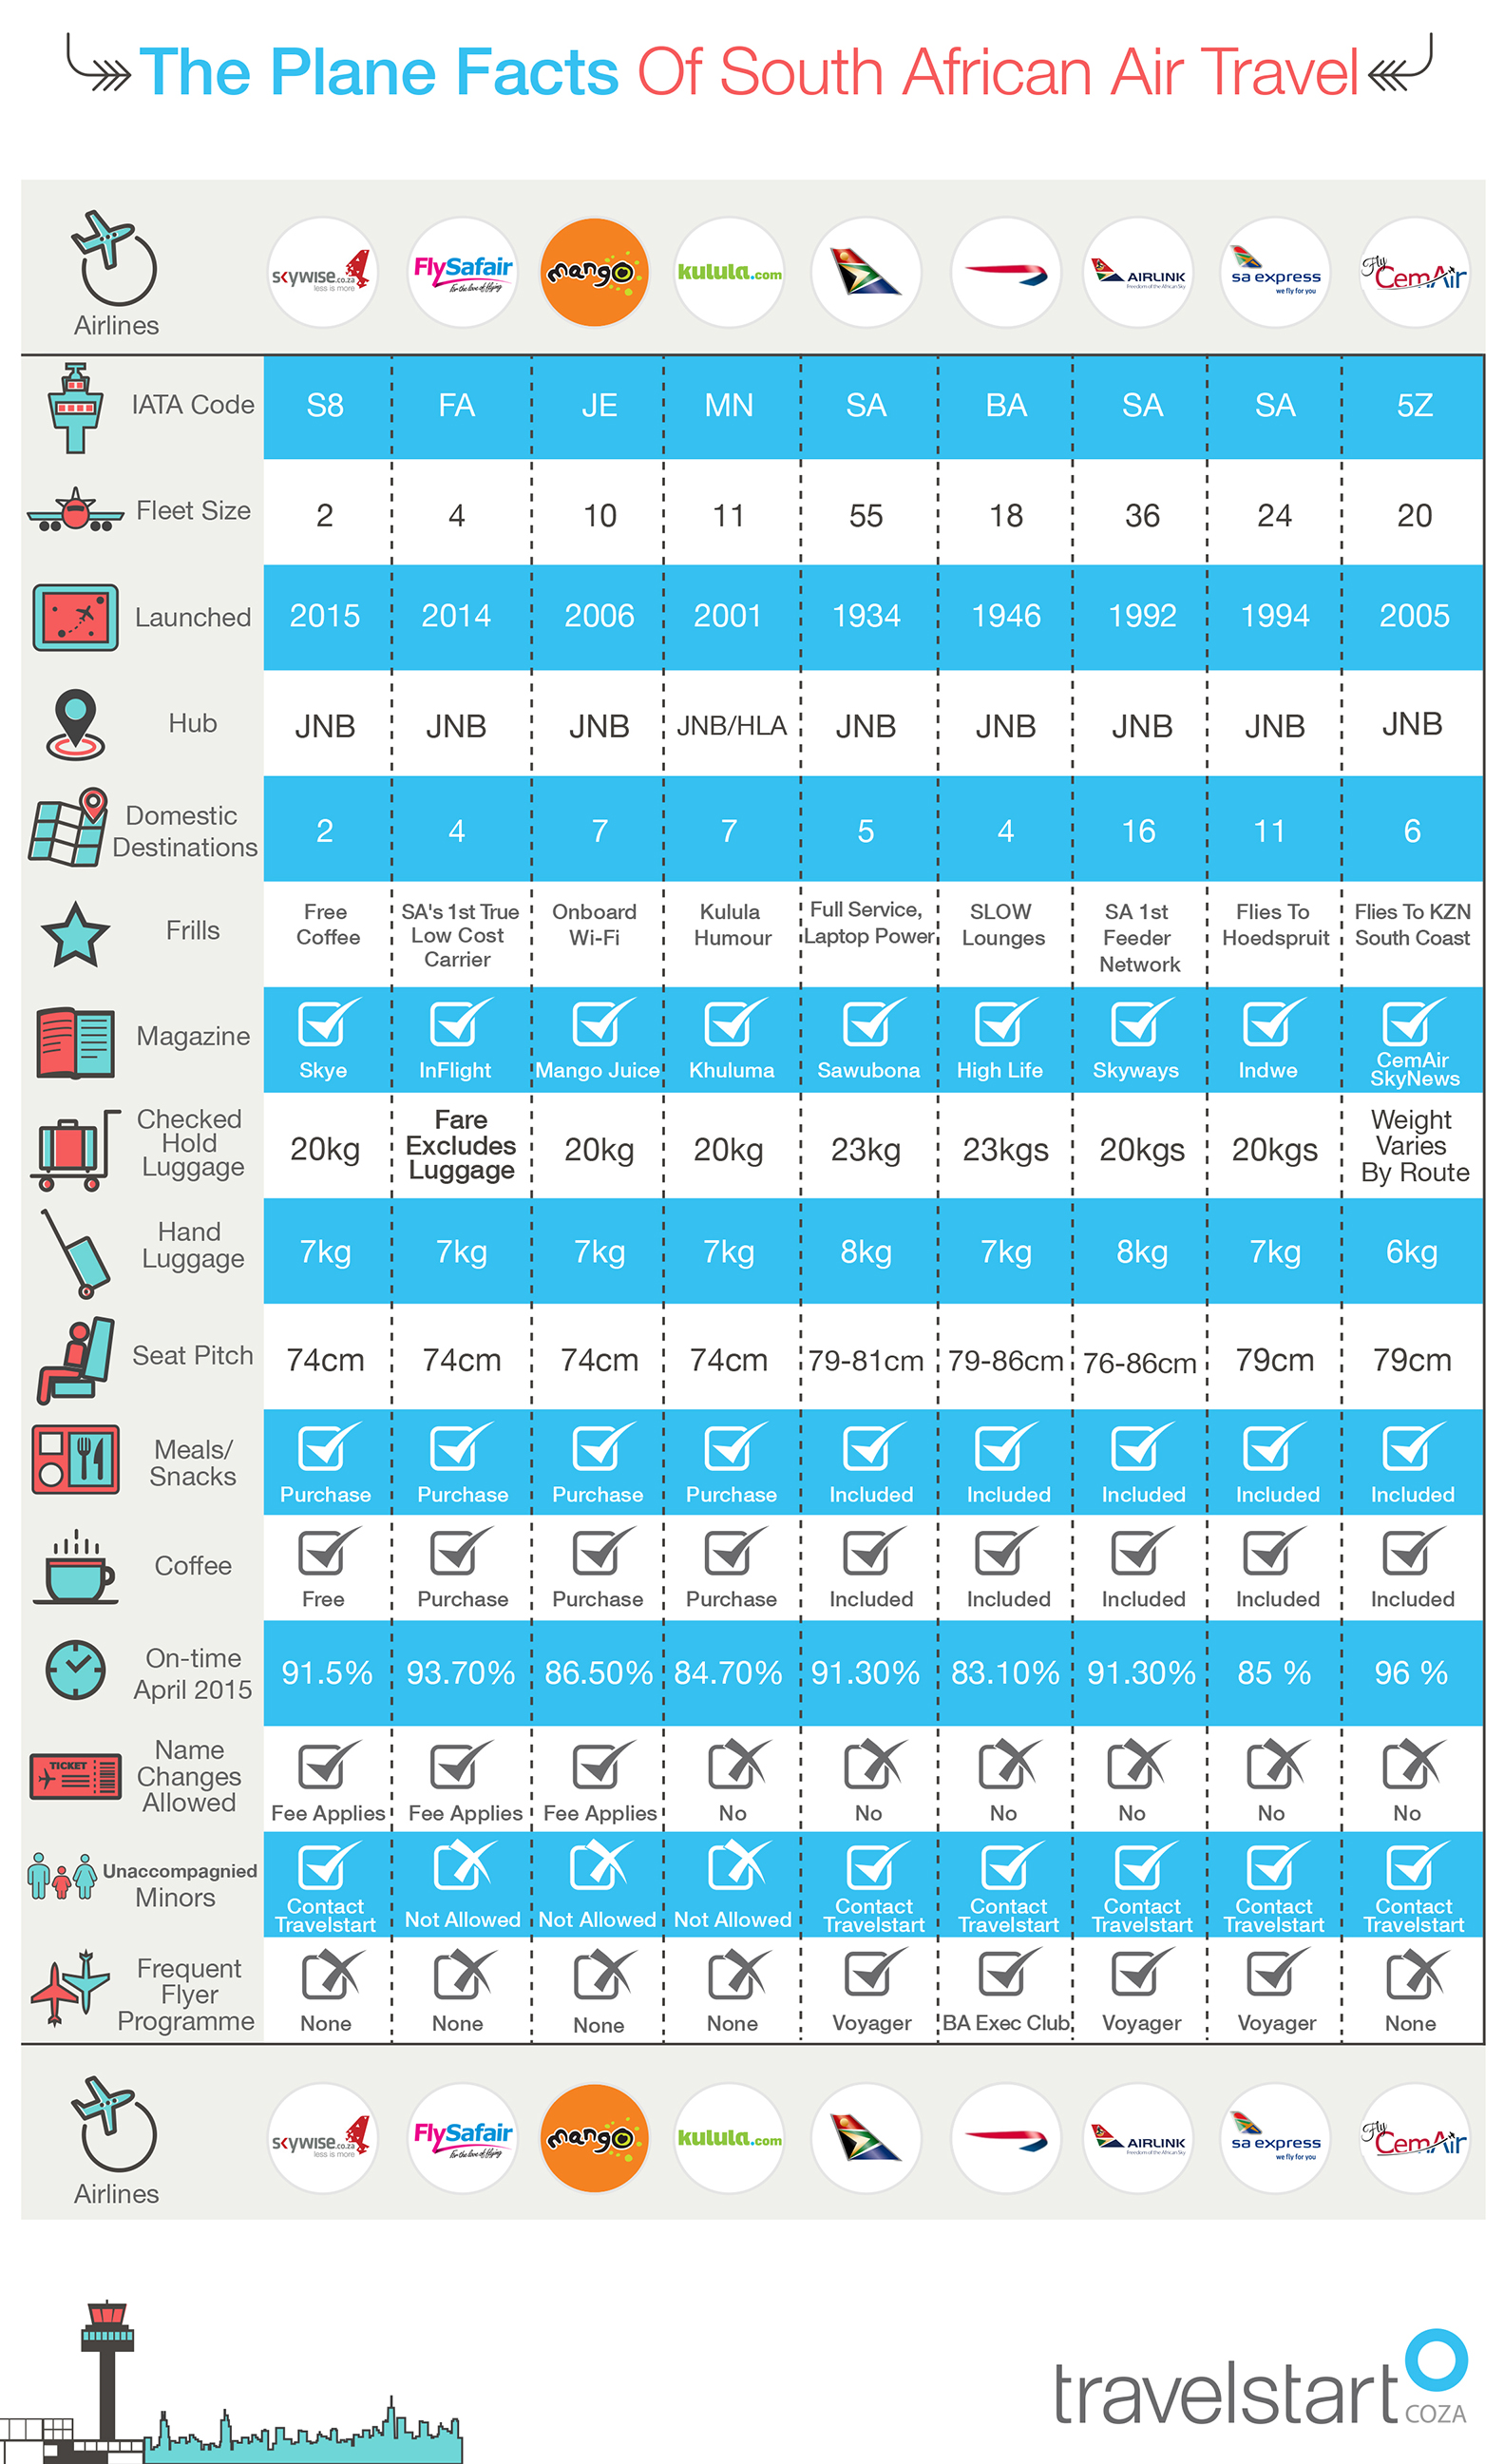 Infographic comparing all 9 of South Africa's full-service domestic carriers and budget airlines.